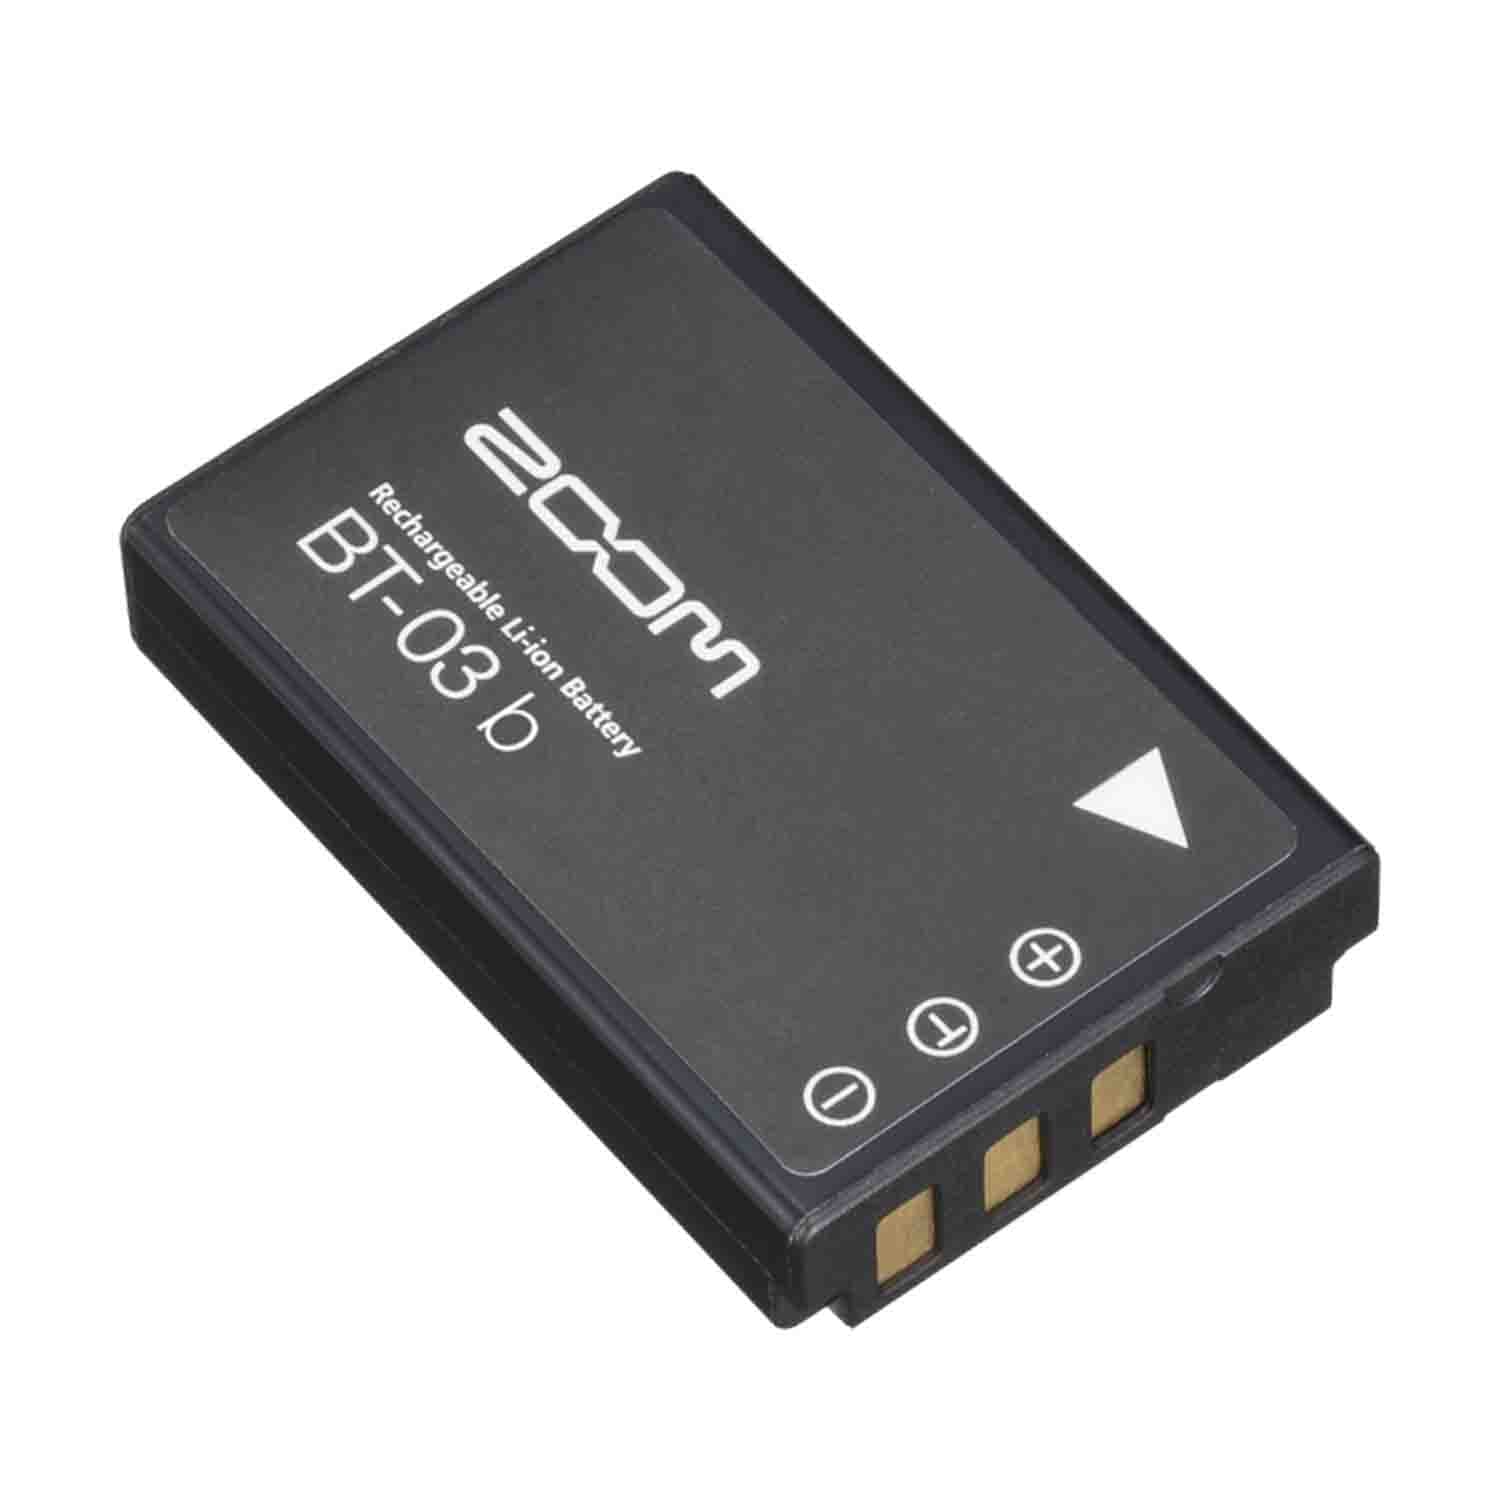 Zoom BT-03b Rechargeable Battery for Zoom Q8 Handy Video Recorder - Hollywood DJ